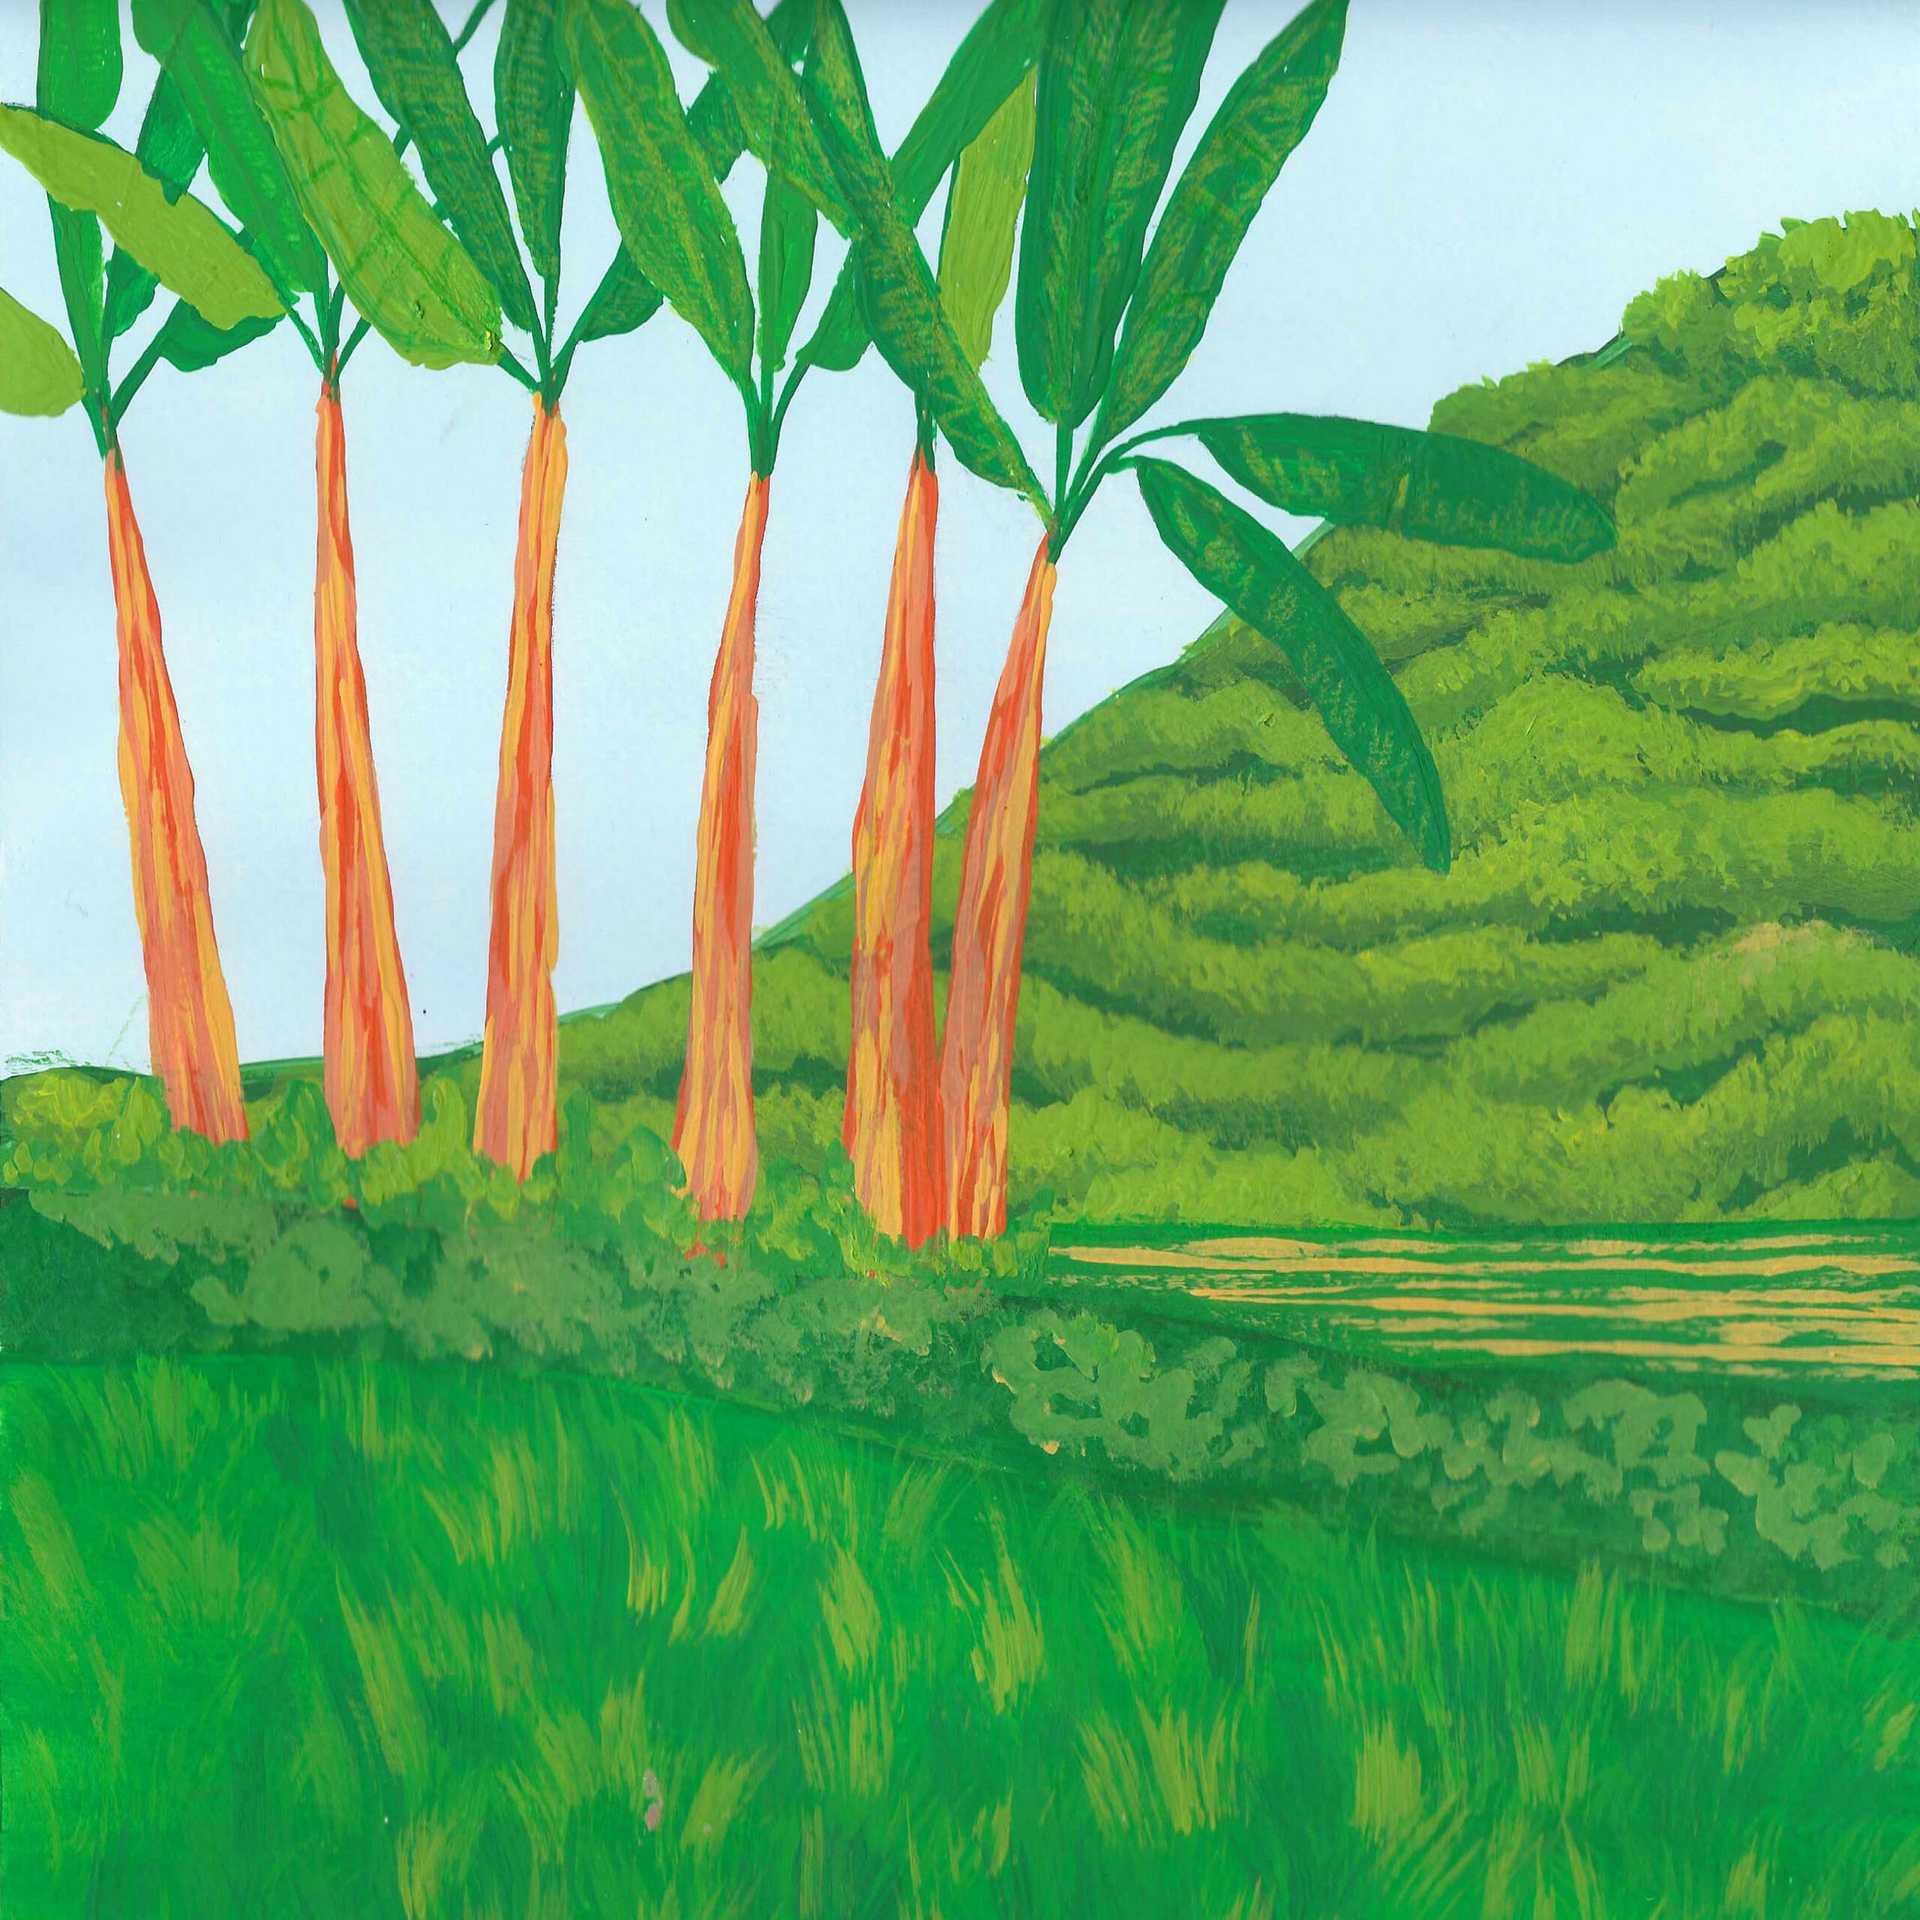 Rain in a Field of Banana Trees - nature landscape painting - earth.fm